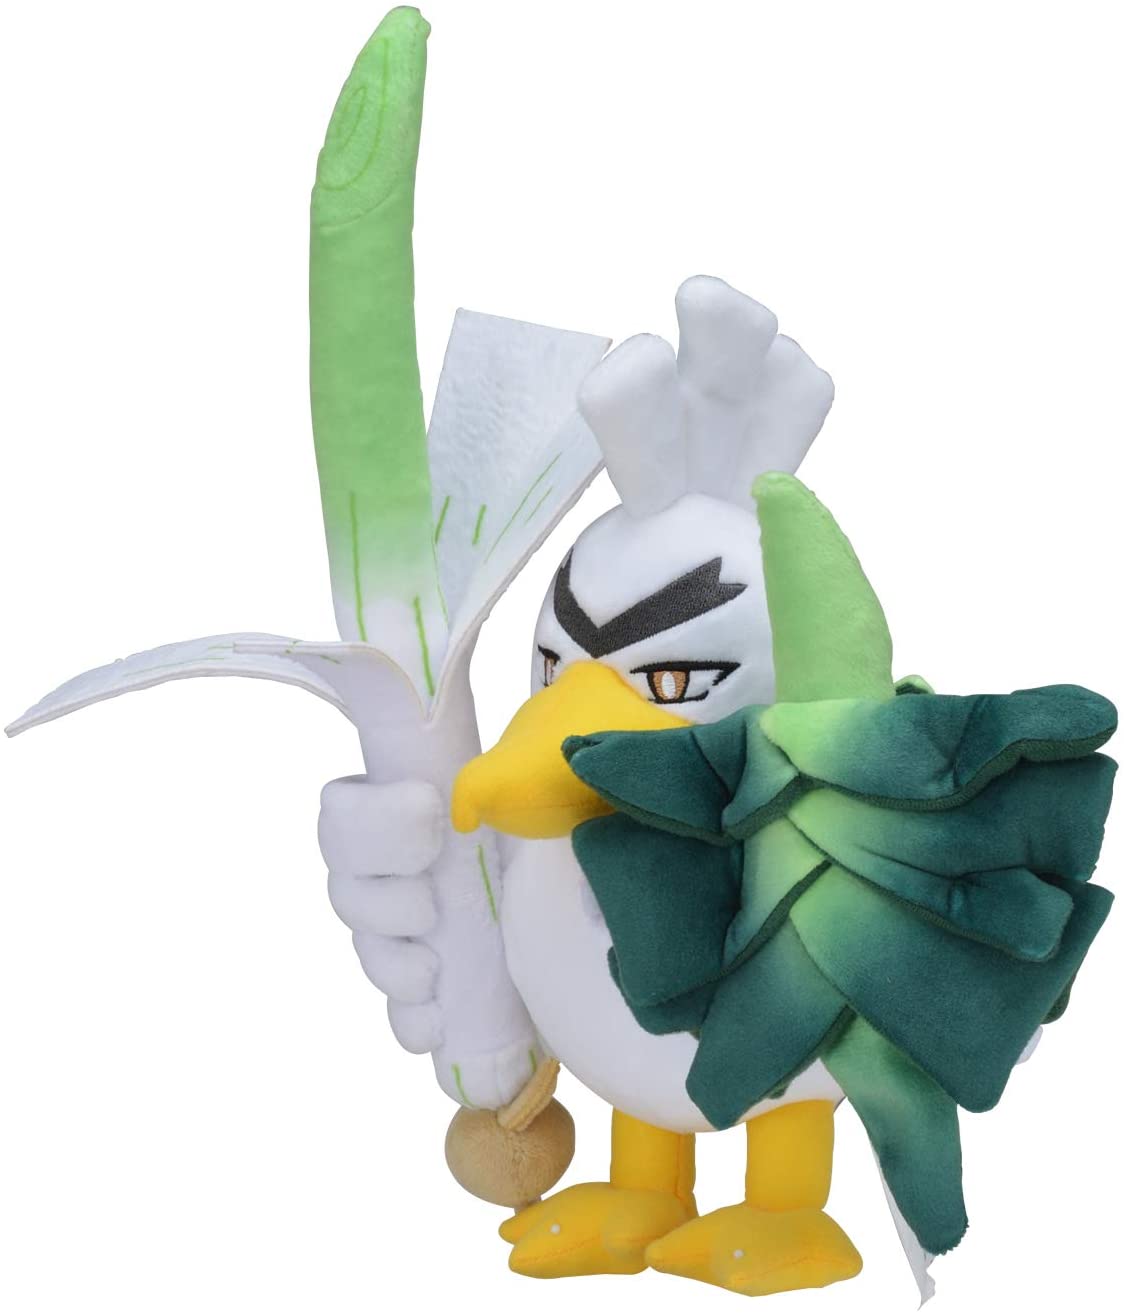 Farfetch'd Was All of Us — Sirfetch'd Is Something Better